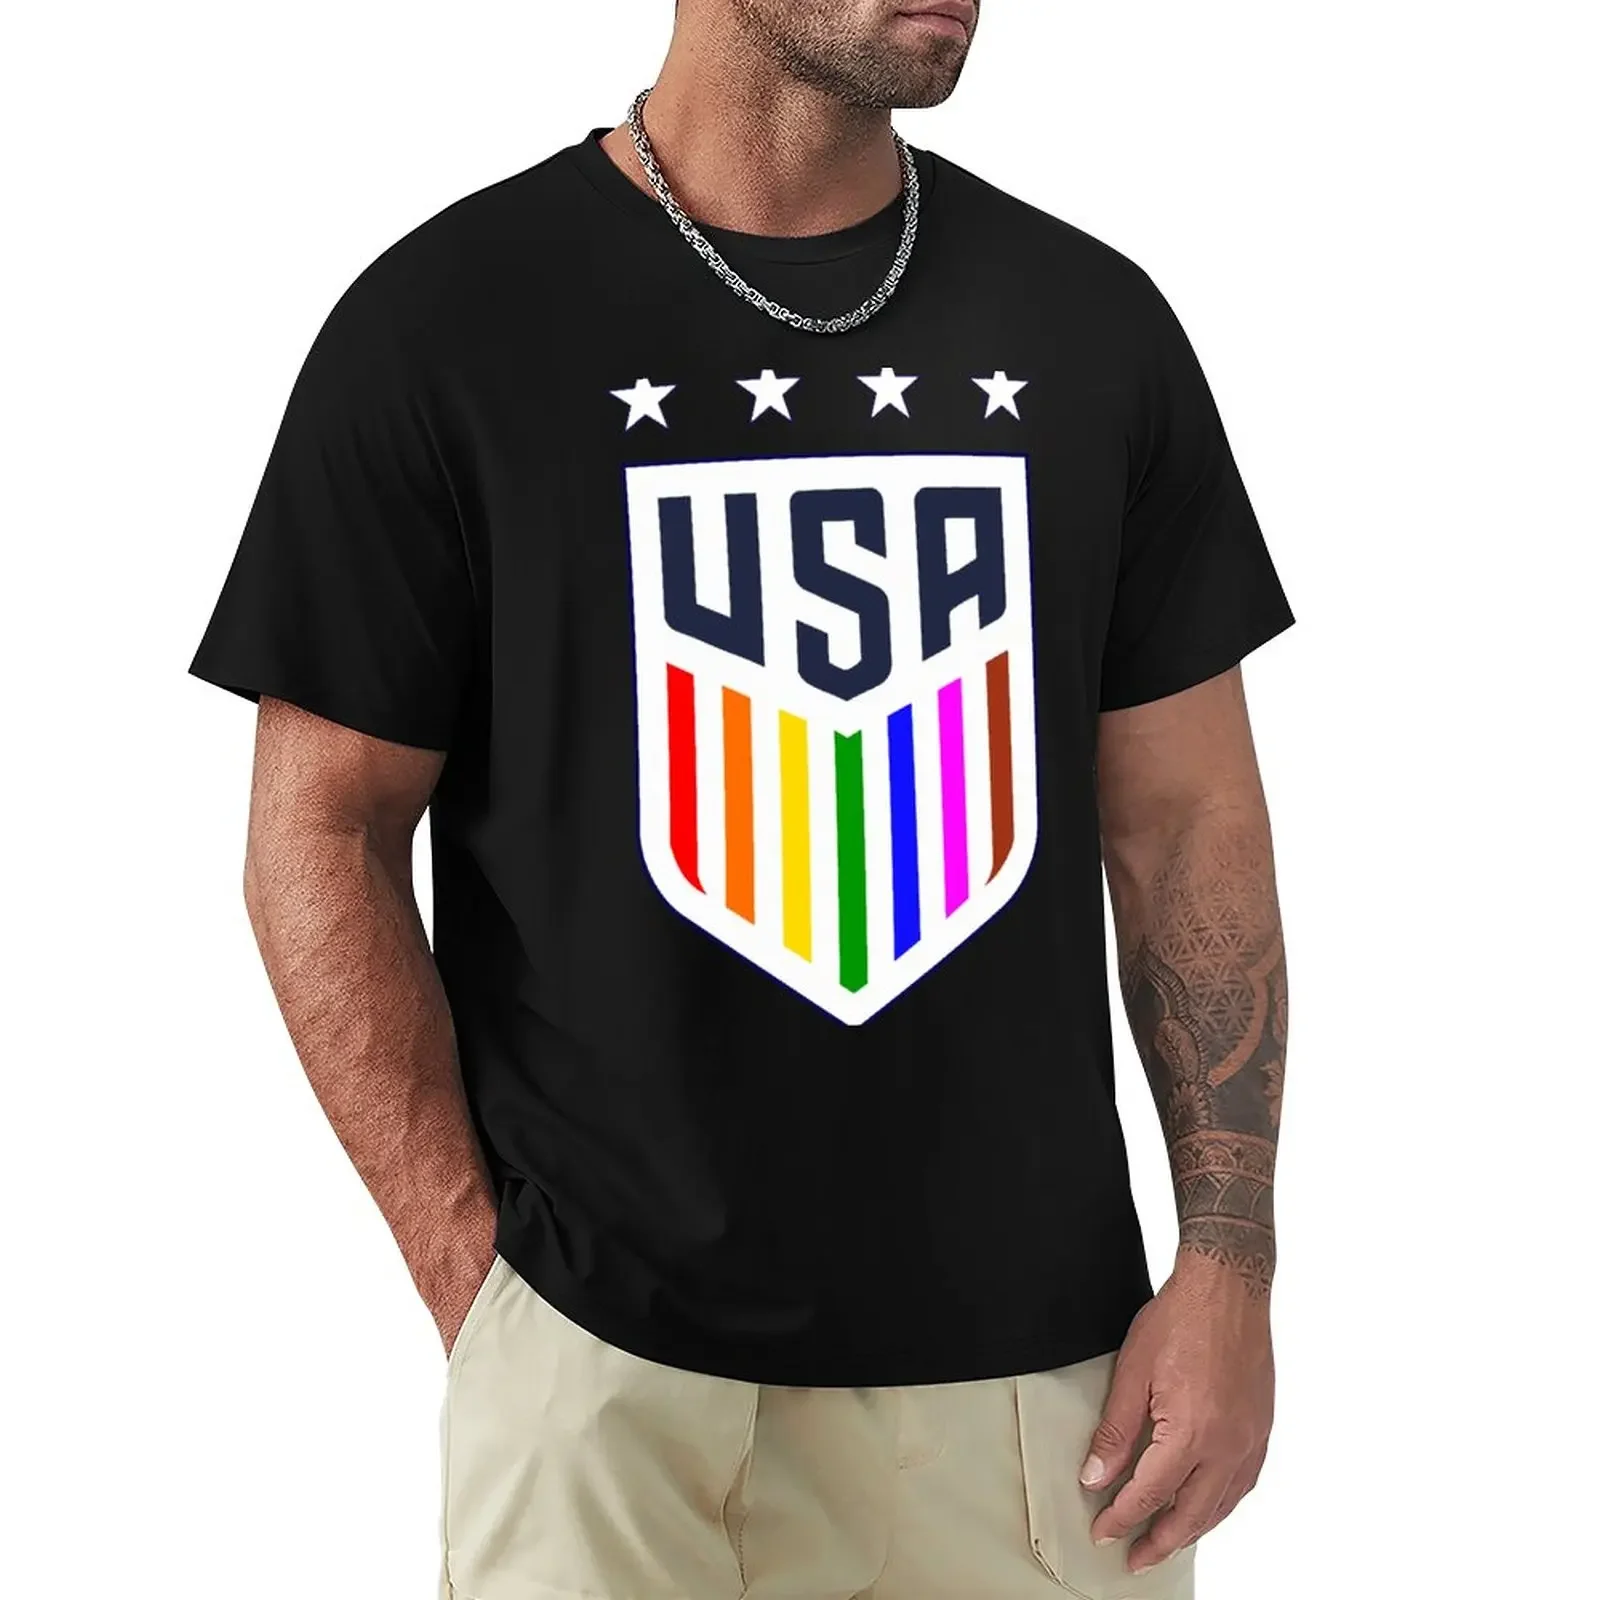 

USWNT-SOCCER-PRIDE BADGE T-Shirt customs customizeds tops aesthetic clothes fitted t shirts for men